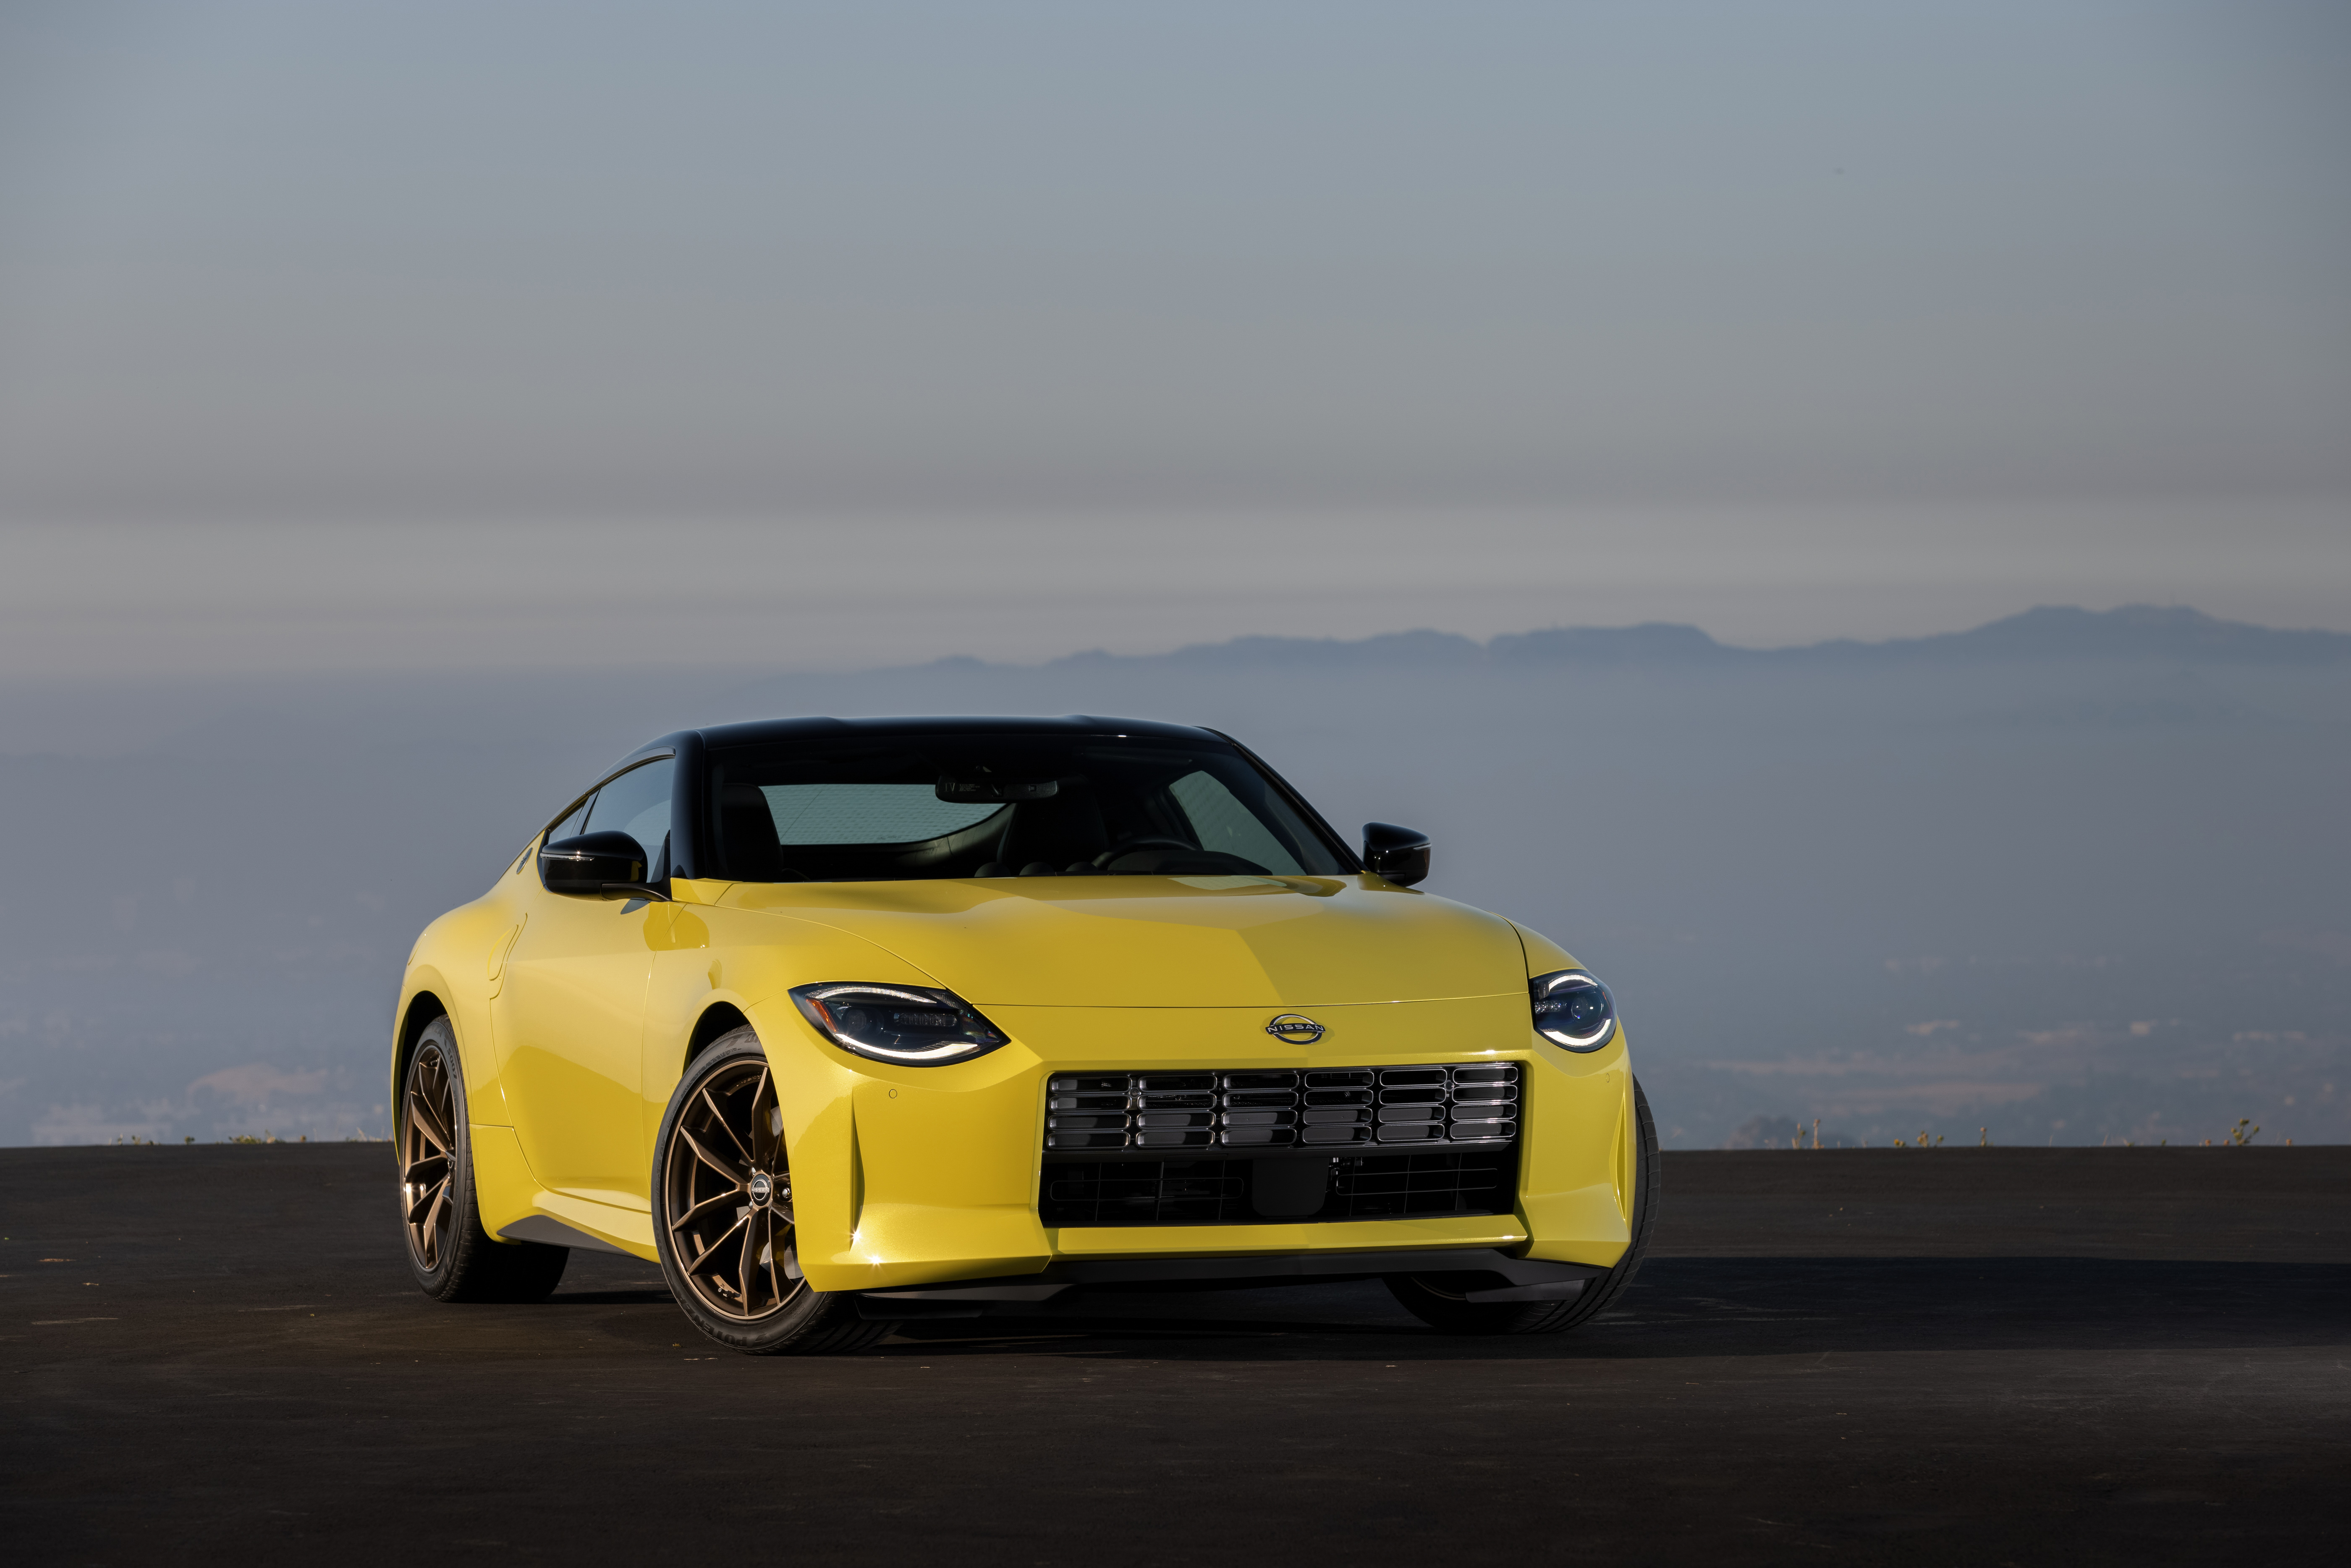 The 2023 Nissan Z in yellow color.